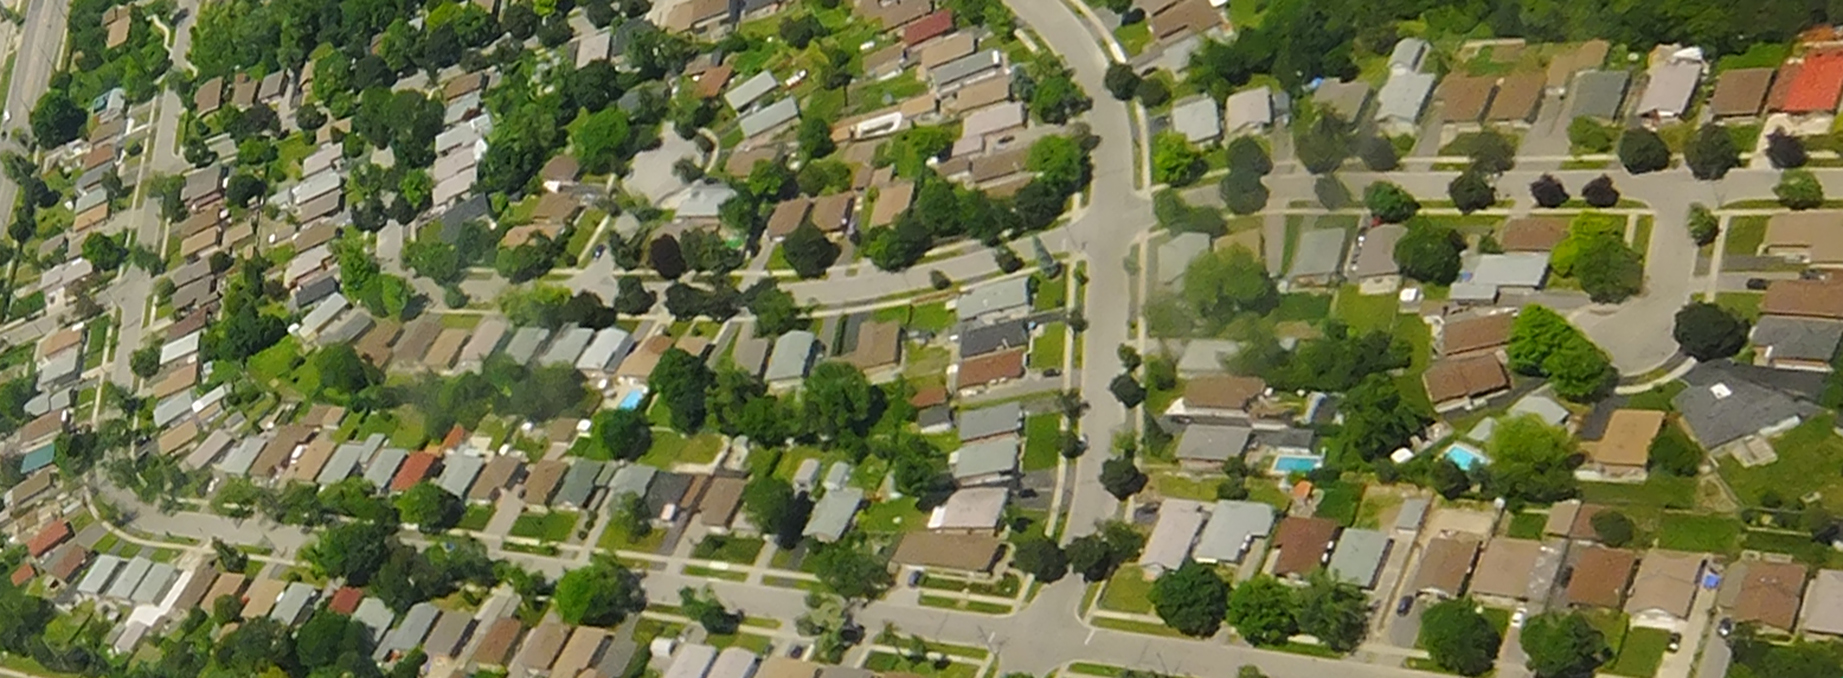 Toronto suburbs and lawns